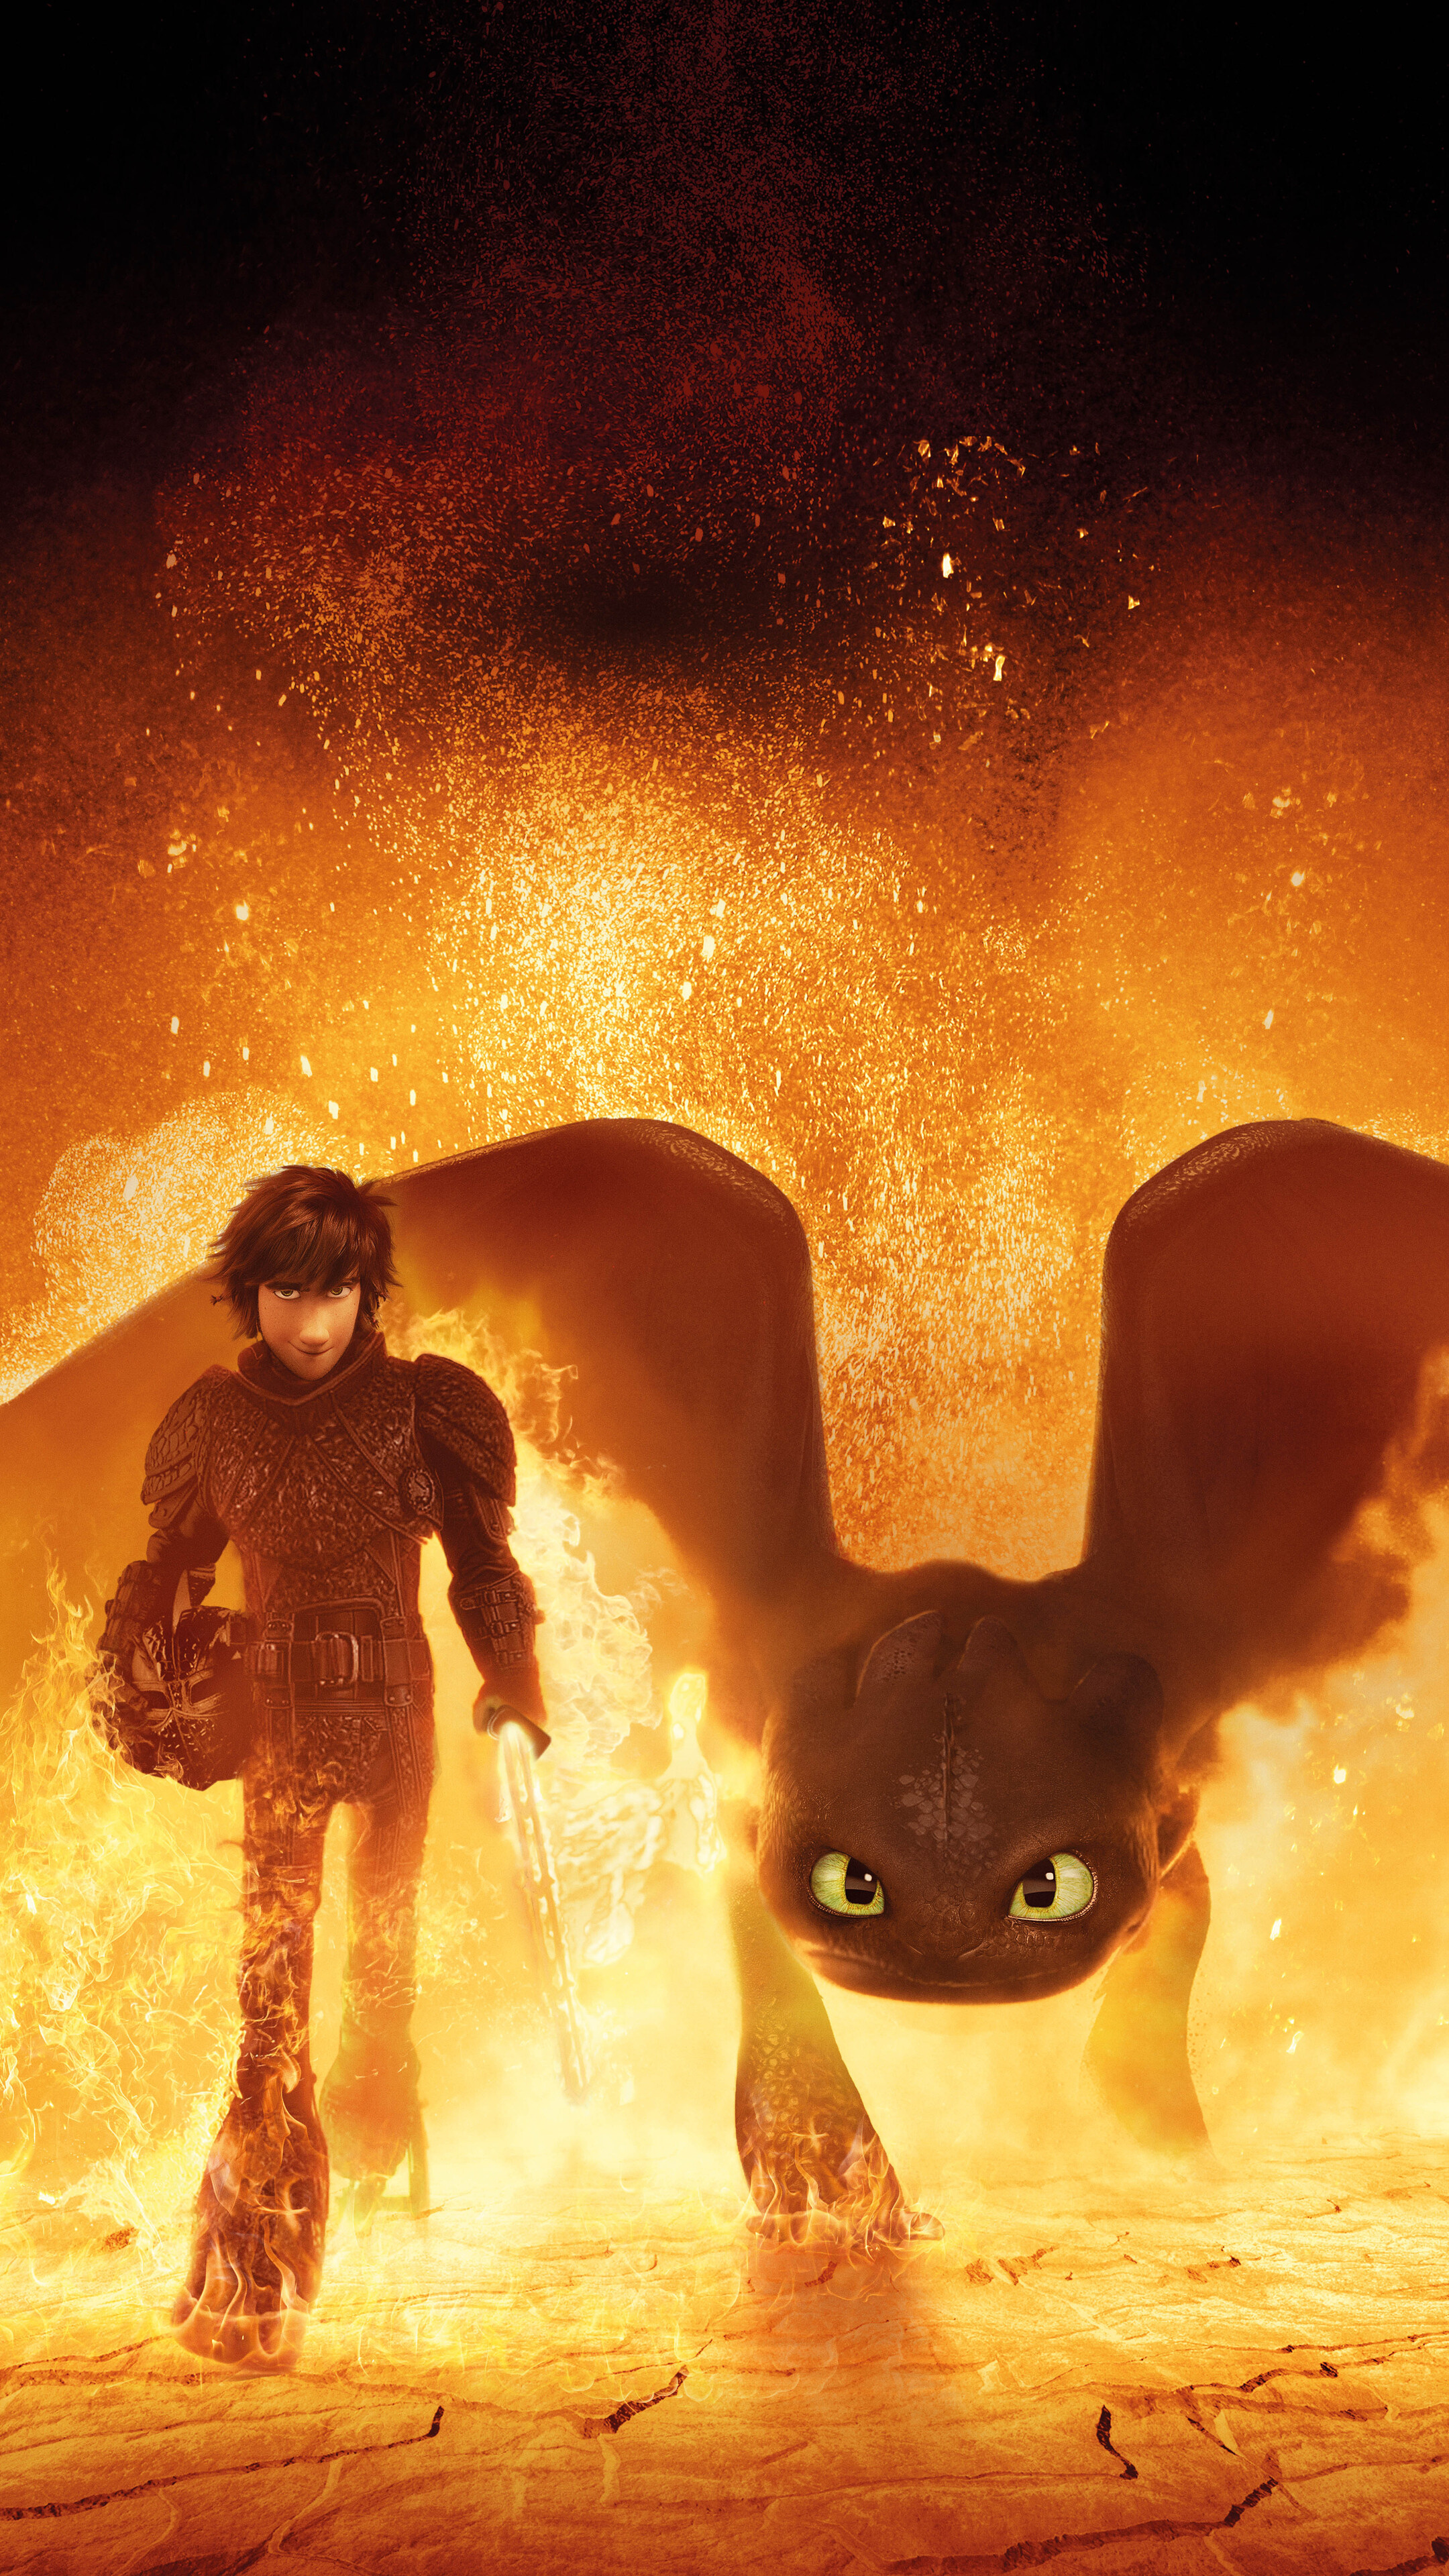 How to Train Your Dragon, Hidden world 4K 2019, Sony Xperia wallpapers, HD 4K, 2160x3840 4K Phone